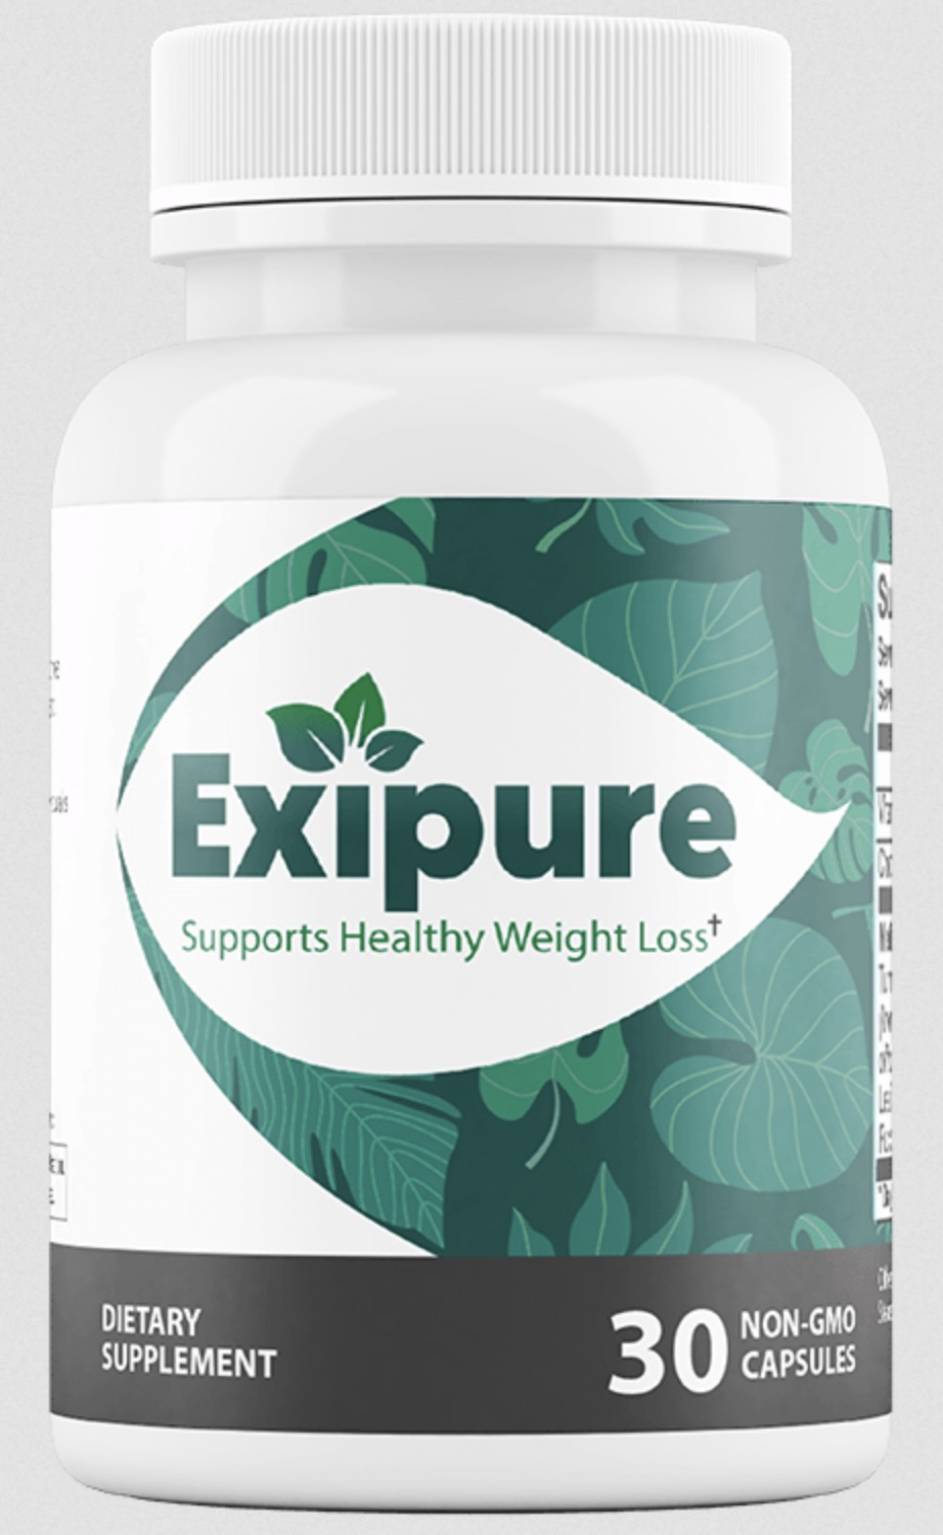 Exipure Purchase